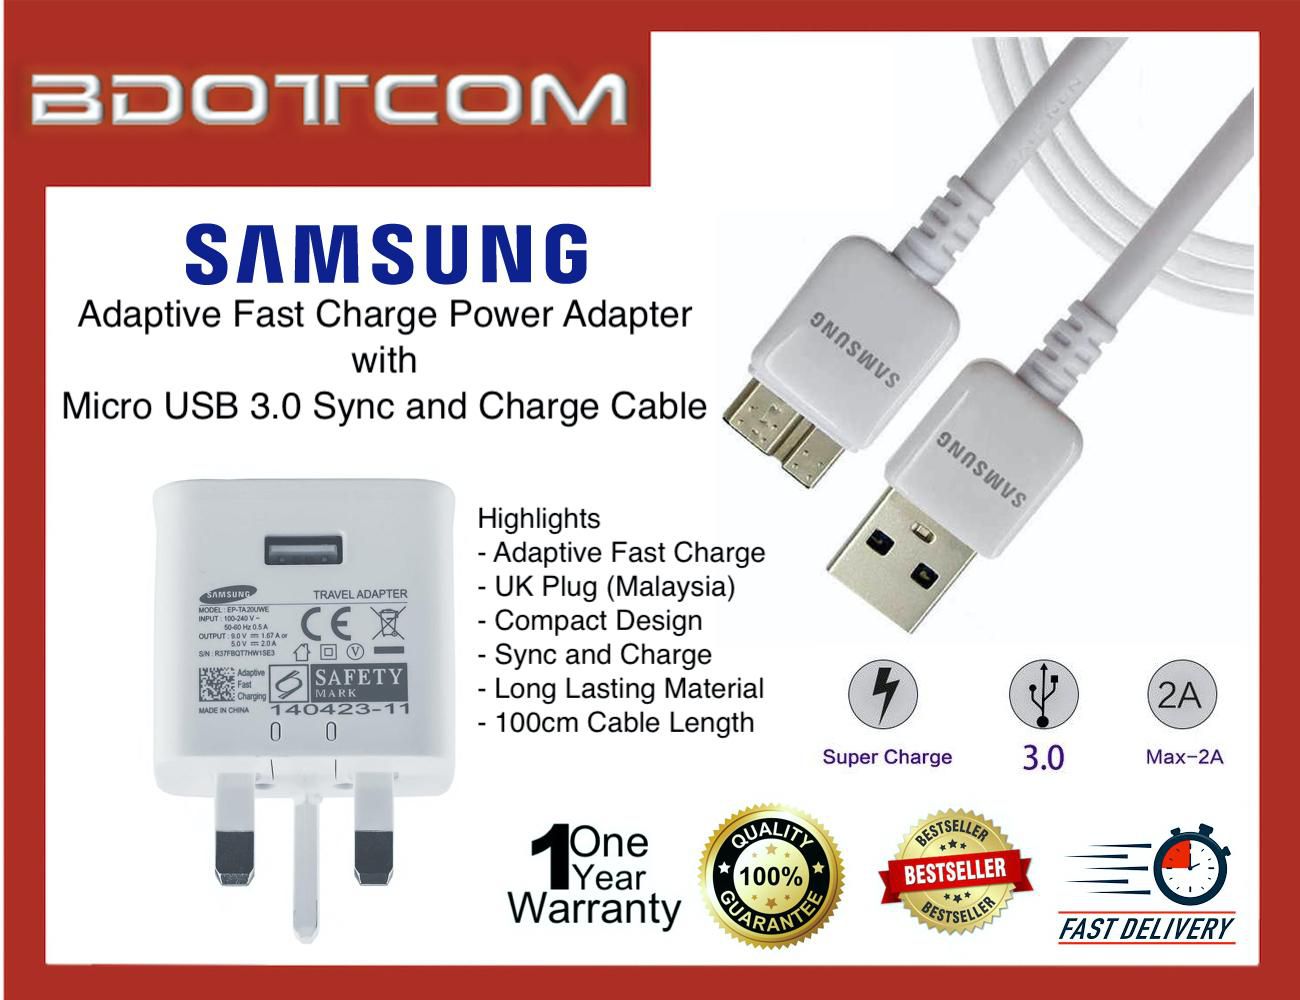 Samsung Adapter Charger with Micro USB 3.0 Sync Data Cable for Samsung